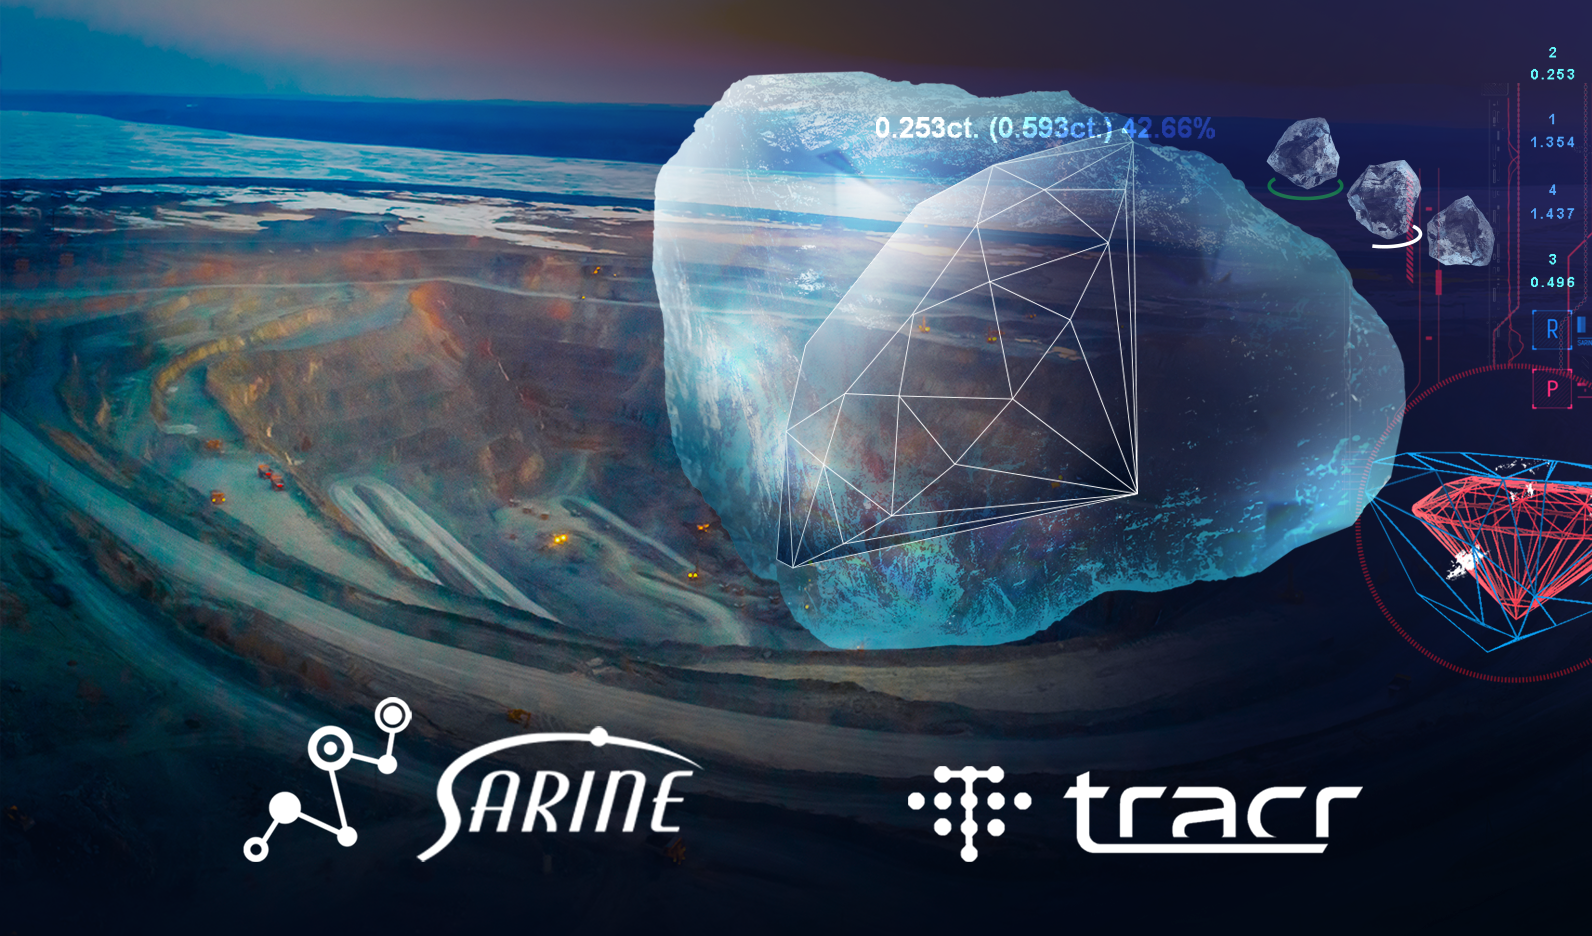 TRACEABILITY-Tracr